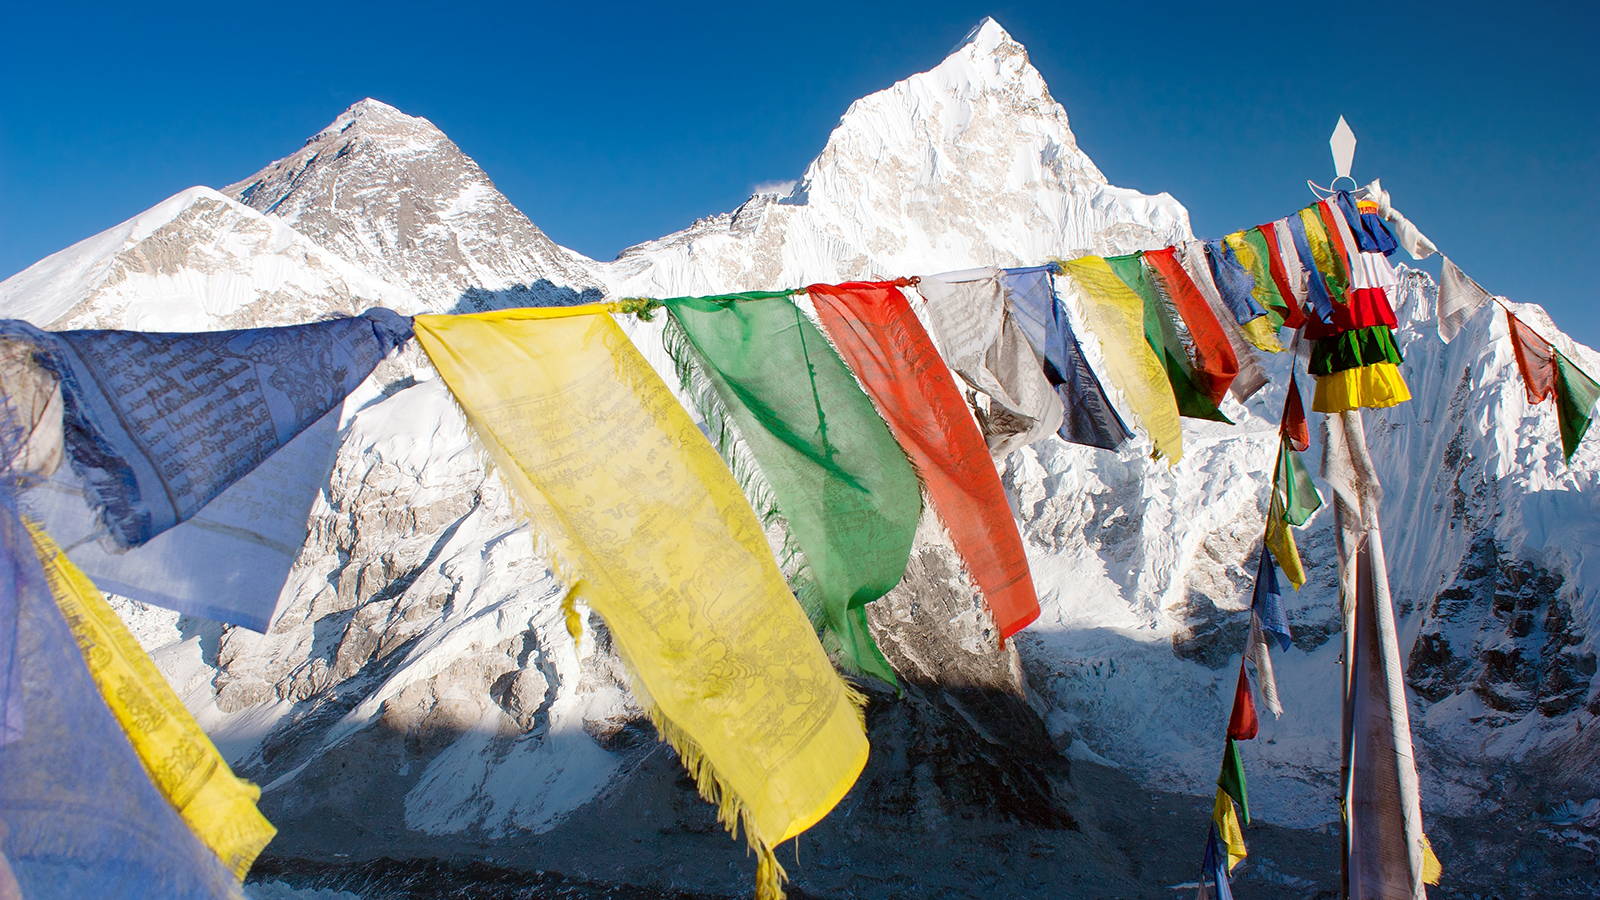 view of Everest with buddhist prayer flags from kala patthar; Shutterstock ID 104980841; PO: Kids Website for March; Job: Hillary Leo; Client: KIDS WEB